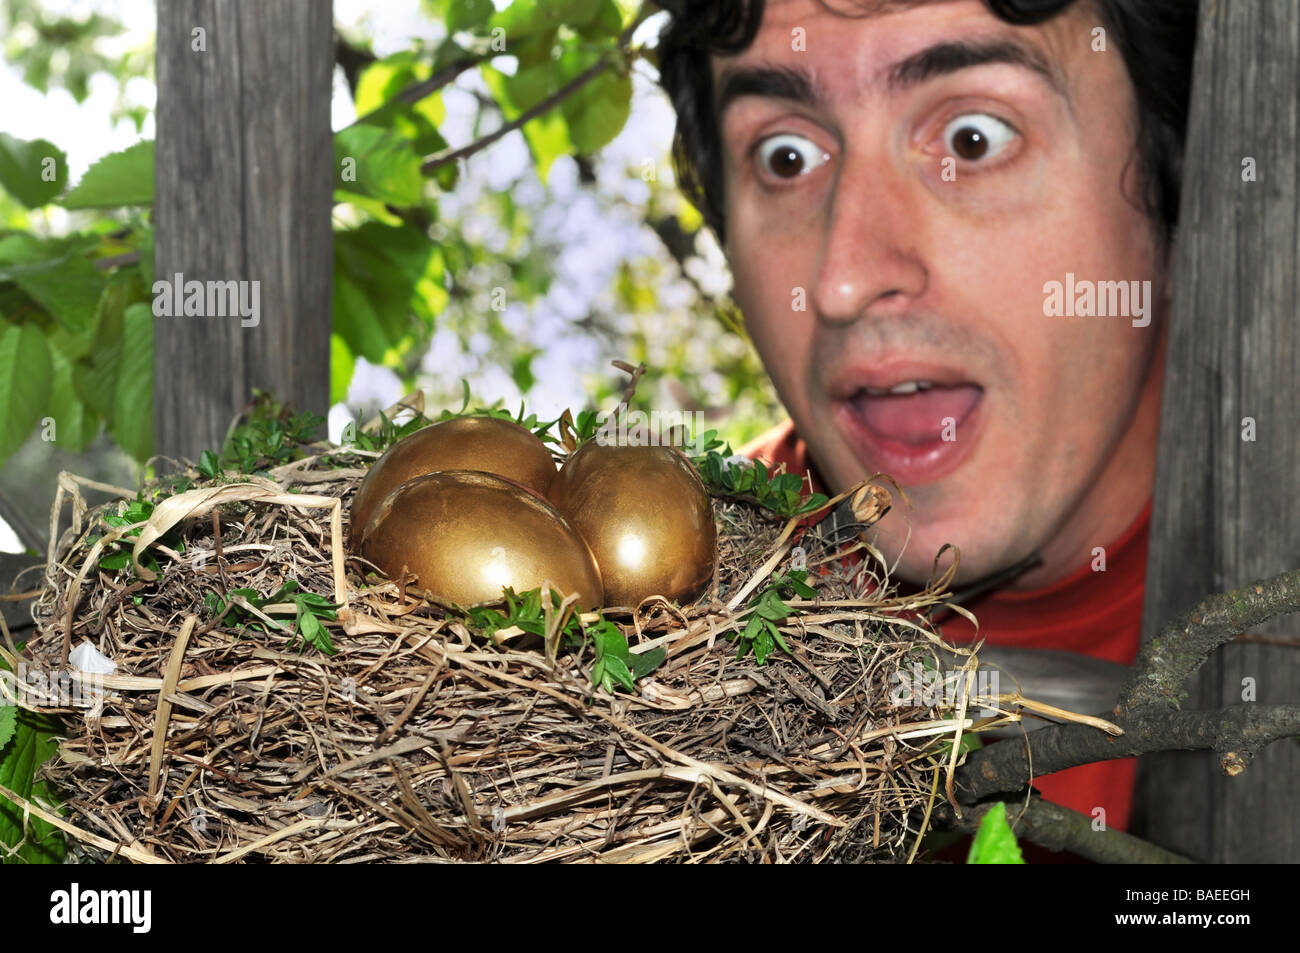 Surprised man on a ladder finding nest with golden eggs. Stock Photo